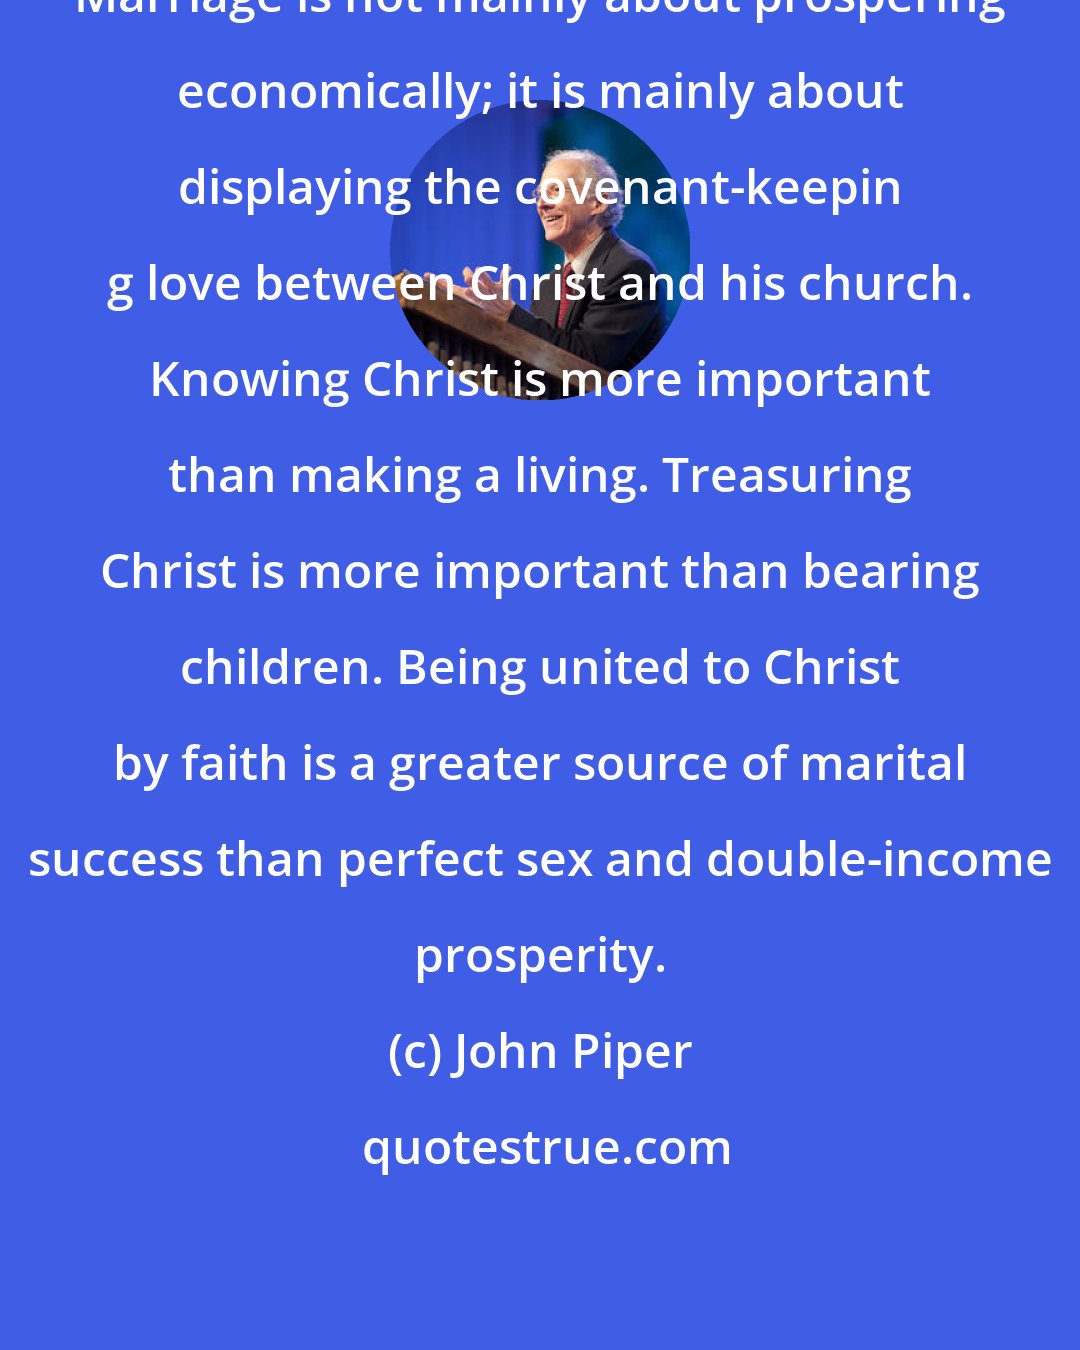 John Piper: Marriage is not mainly about prospering economically; it is mainly about displaying the covenant-keepin g love between Christ and his church. Knowing Christ is more important than making a living. Treasuring Christ is more important than bearing children. Being united to Christ by faith is a greater source of marital success than perfect sex and double-income prosperity.